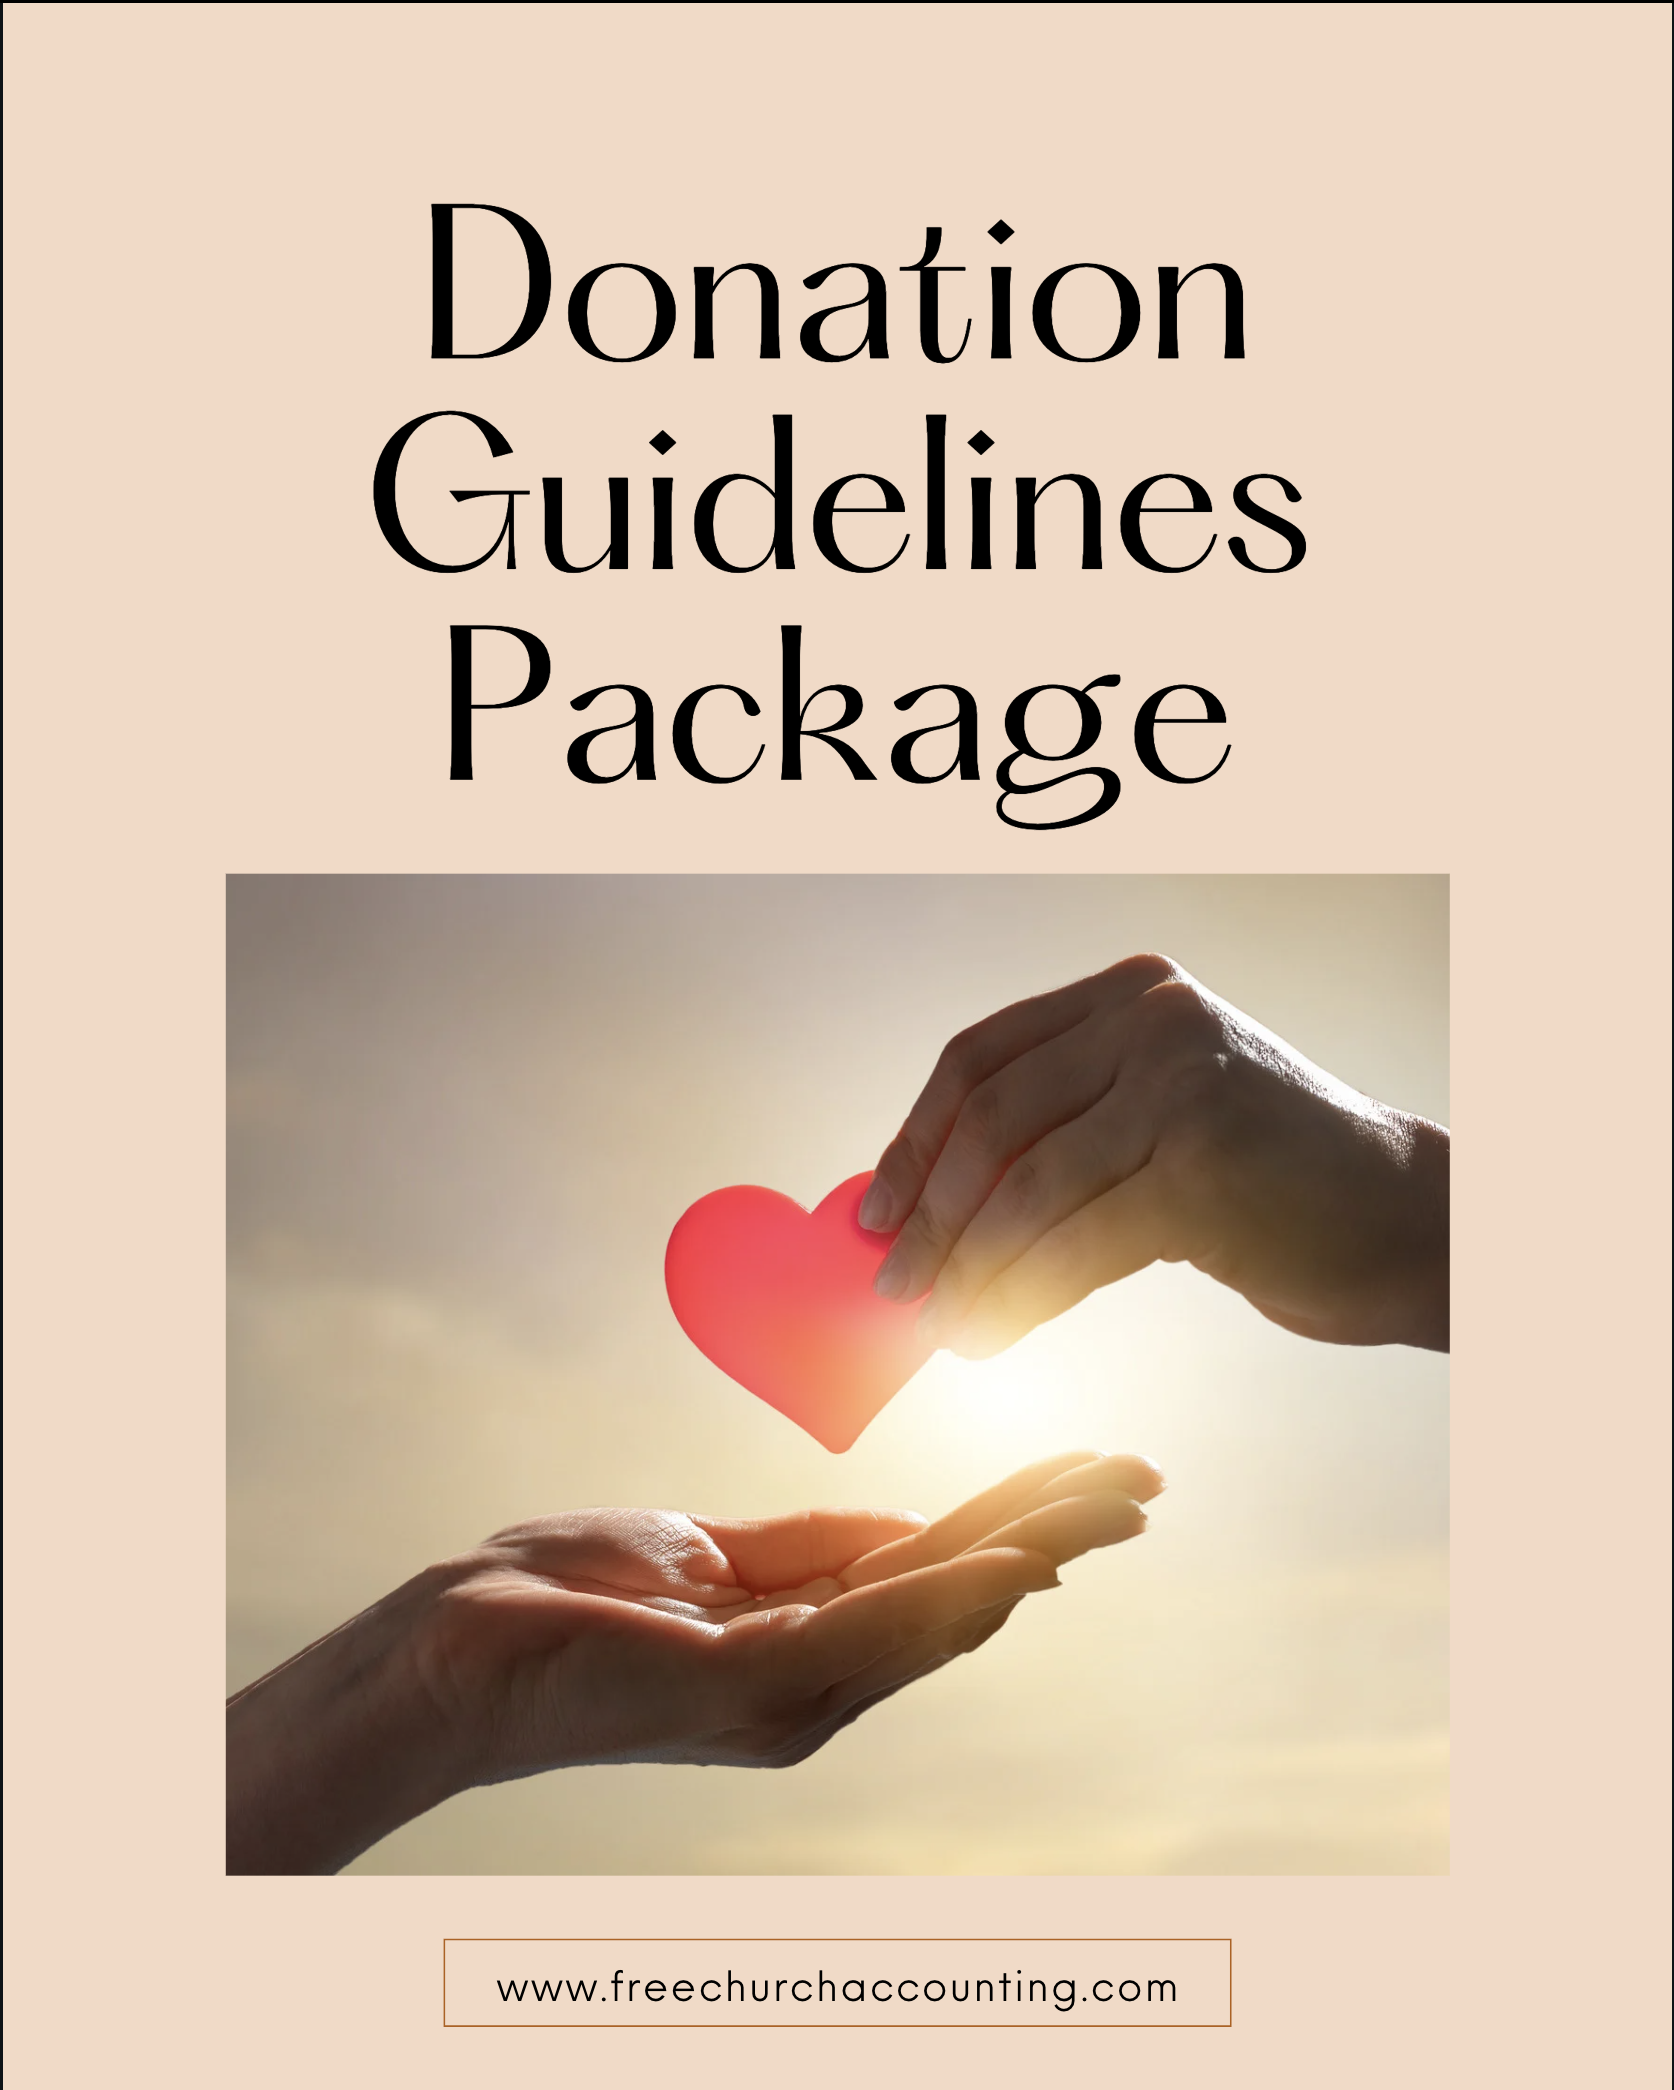 Donation Guidelines Package